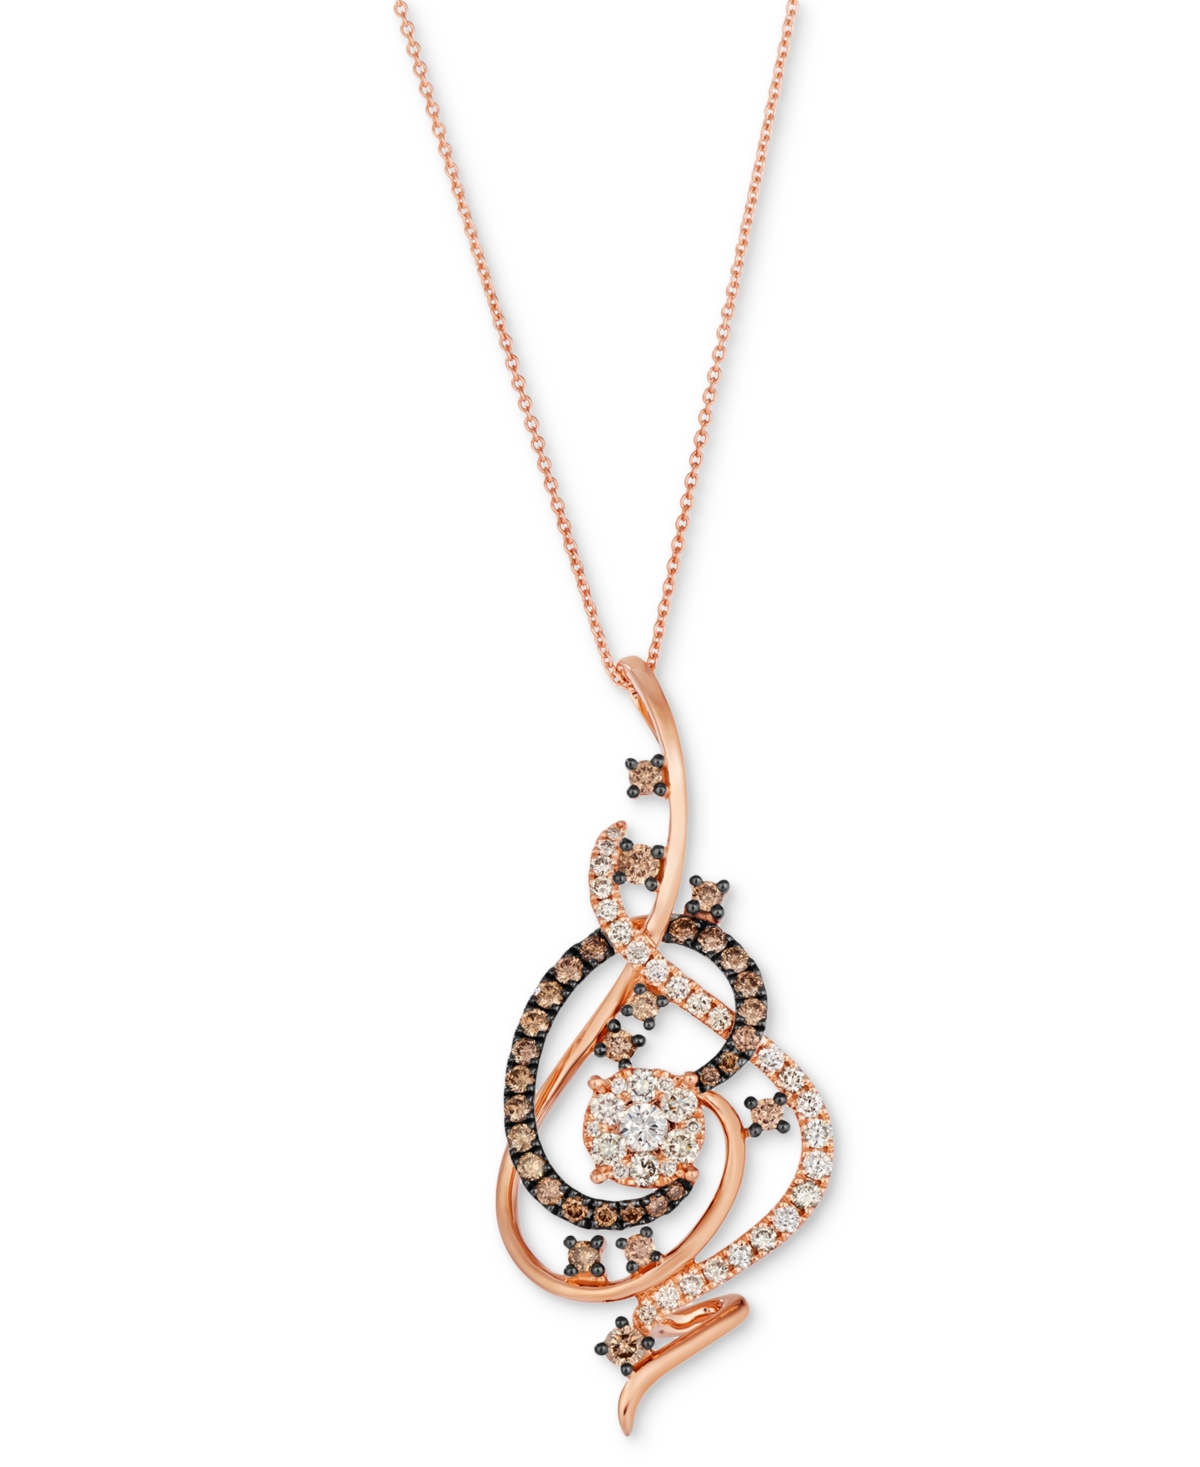 Crazy Collection Chocolate Diamond & Nude Diamond Swirl Adjustable 20" Pendant Necklace (1-1/2 ct. t.w.) in 14k Rose Gold